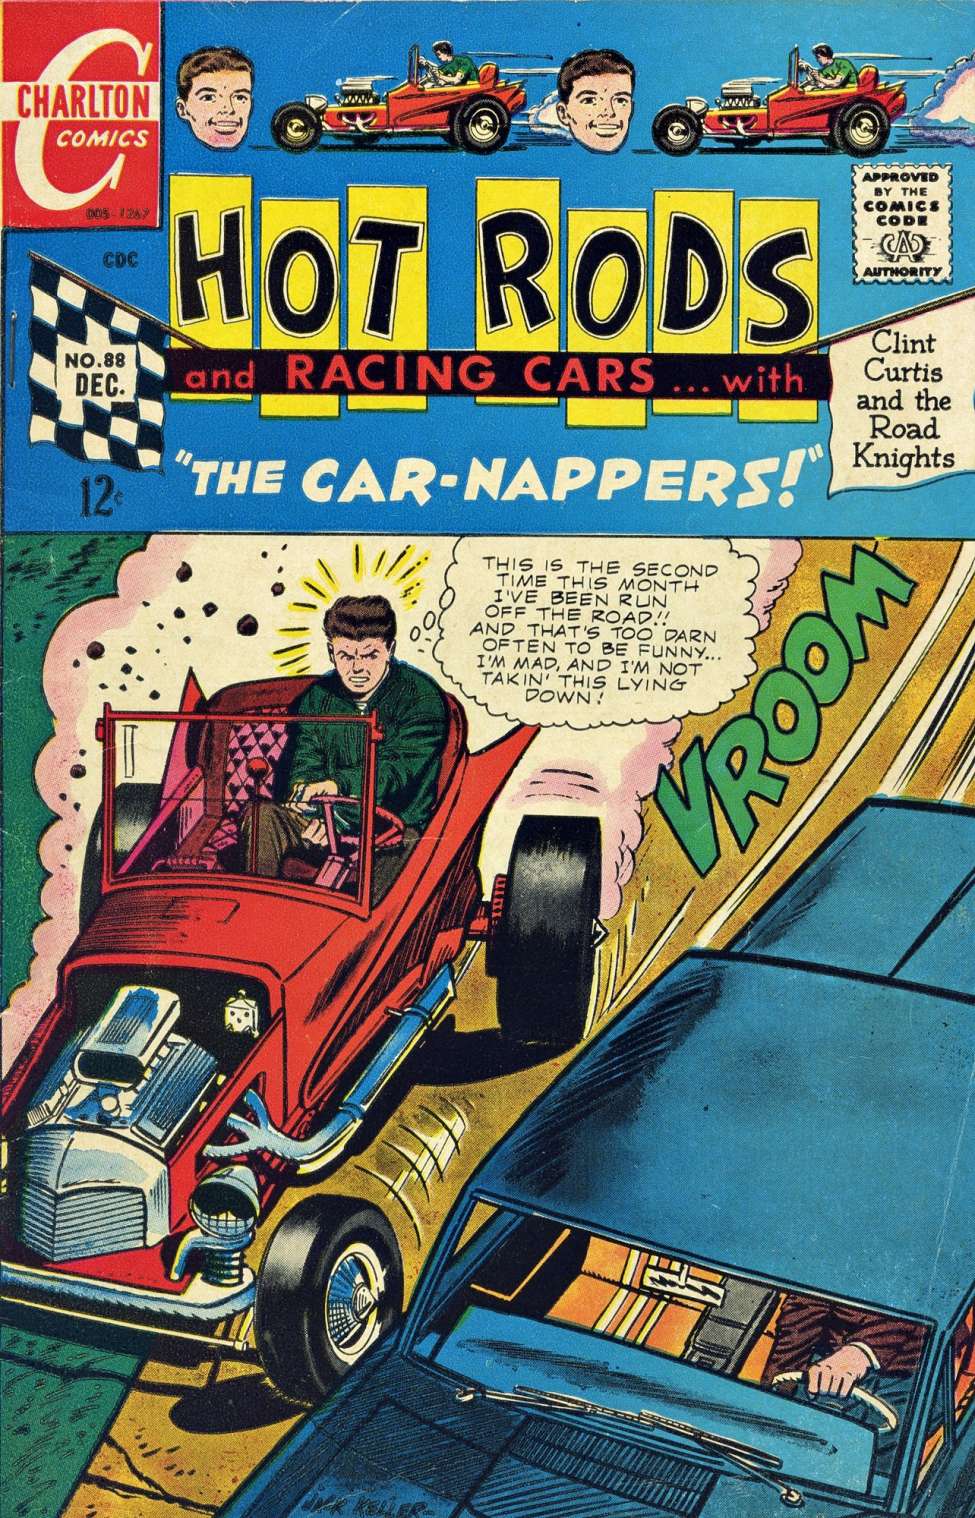 Comic Book Cover For Hot Rods and Racing Cars 88